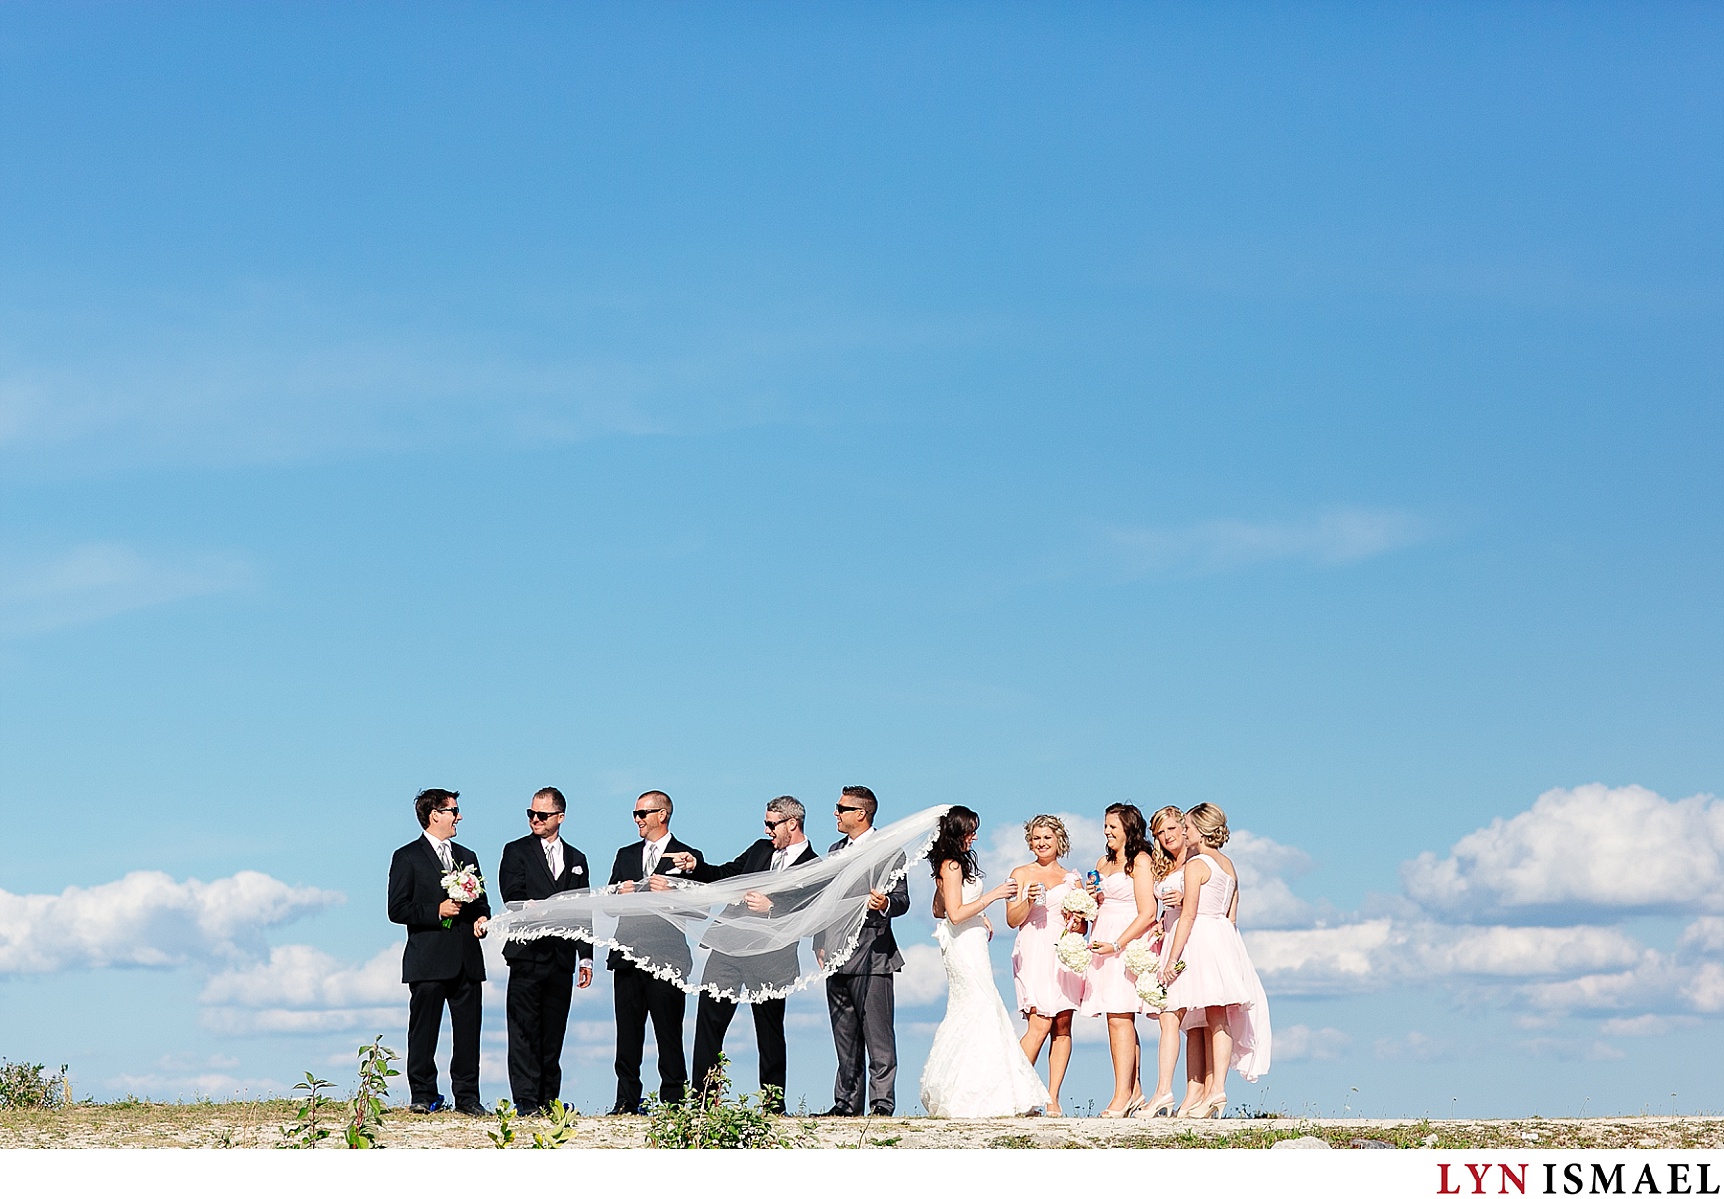 A fun portrait of the wedding party at the Cranberry Resort in Collingwood.